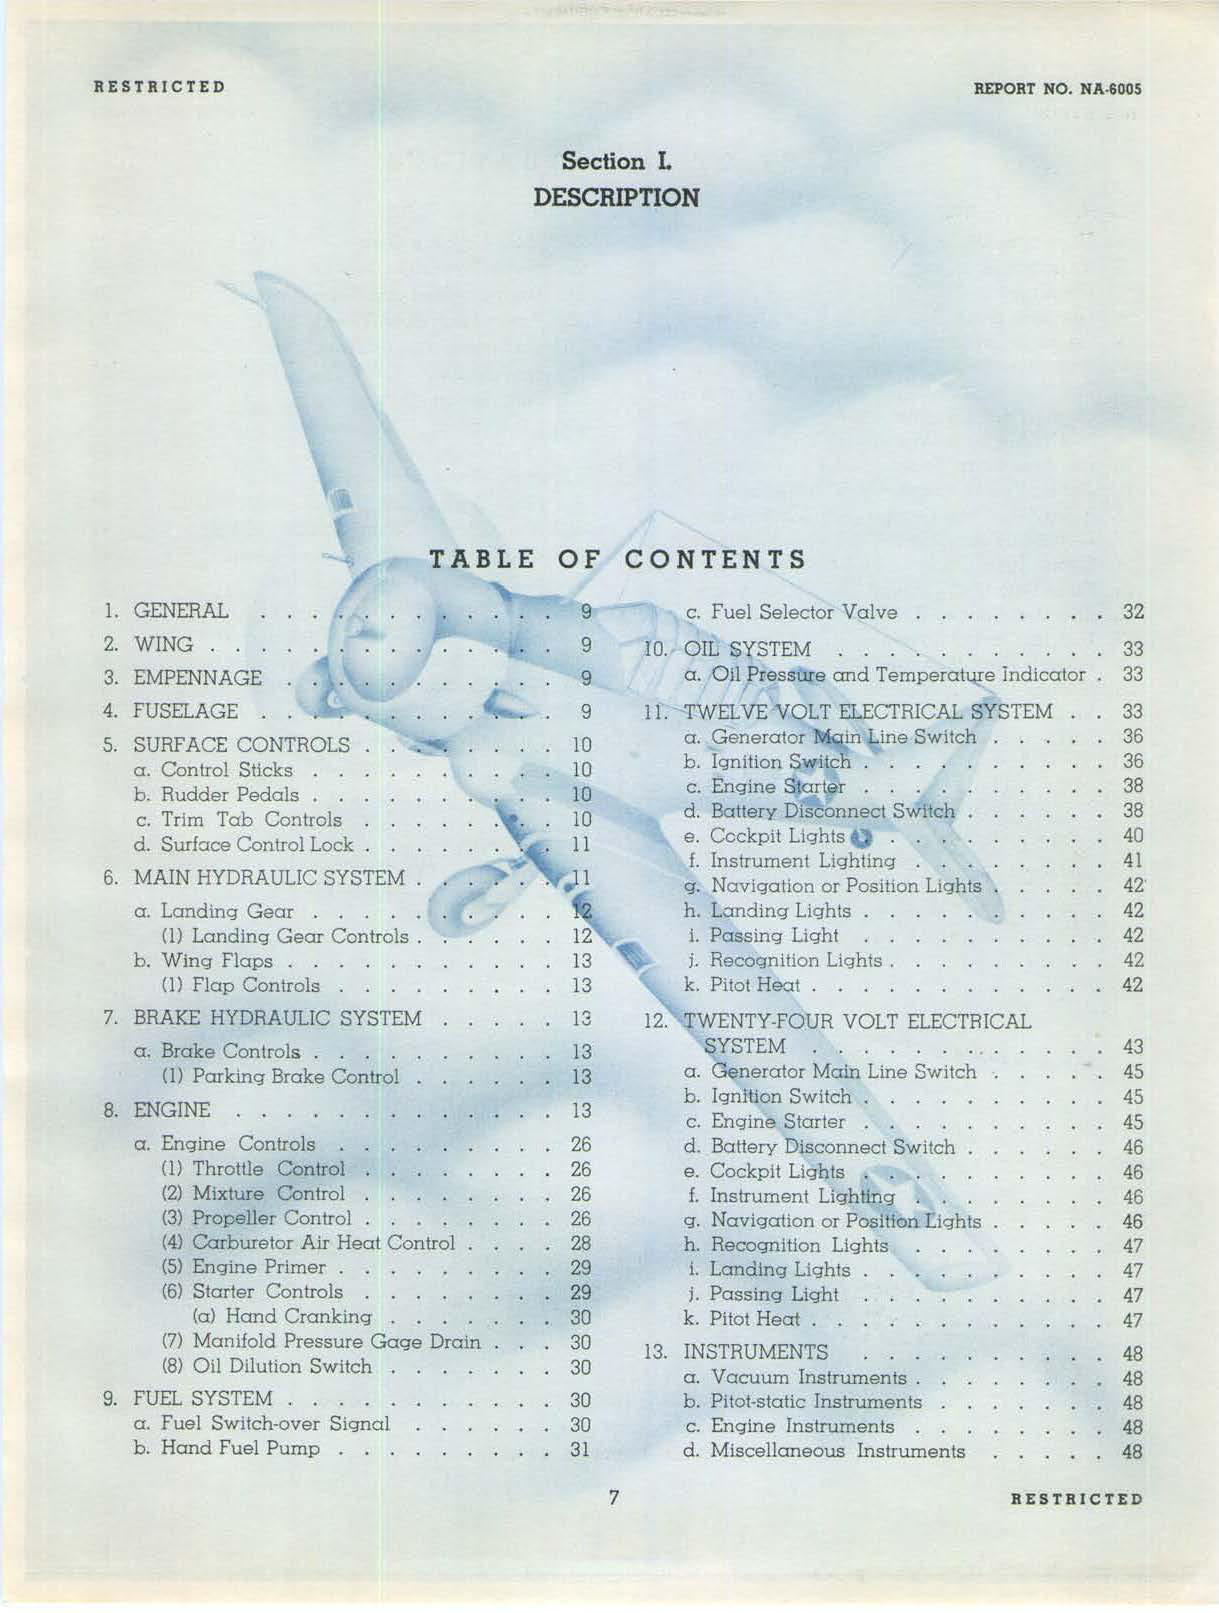 Sample page 8 from AirCorps Library document: Flight Operating Instructions for Texan Trainer -AT-6C, AT-6D, SNJ-4 and SNJ-5